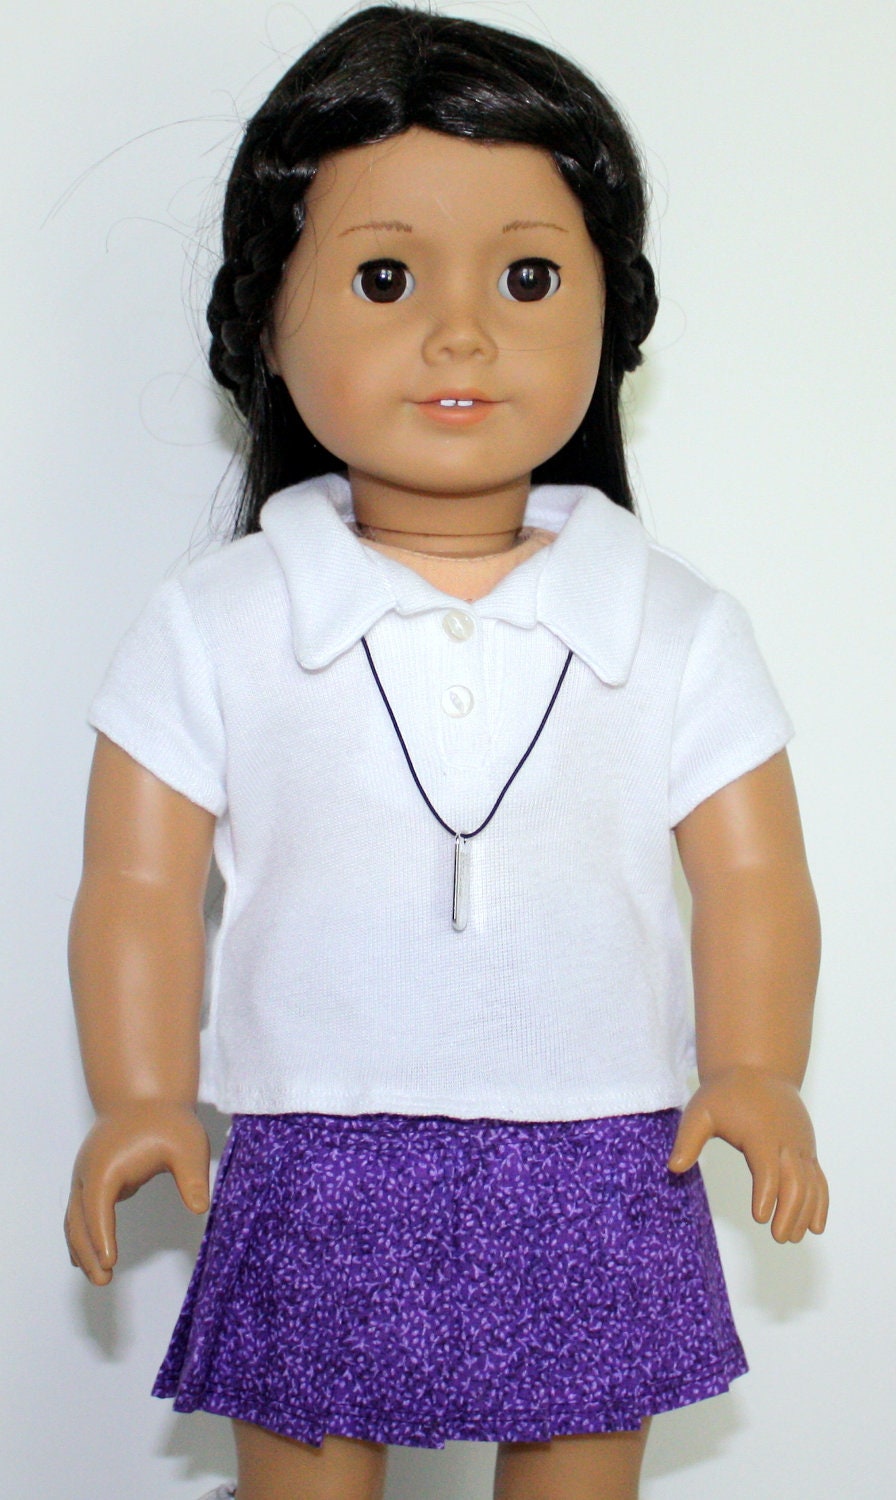 American Girl Doll White Knit Polo Shirt Purple Print Pleated Skirt  Charm Necklace - JessieAmerica